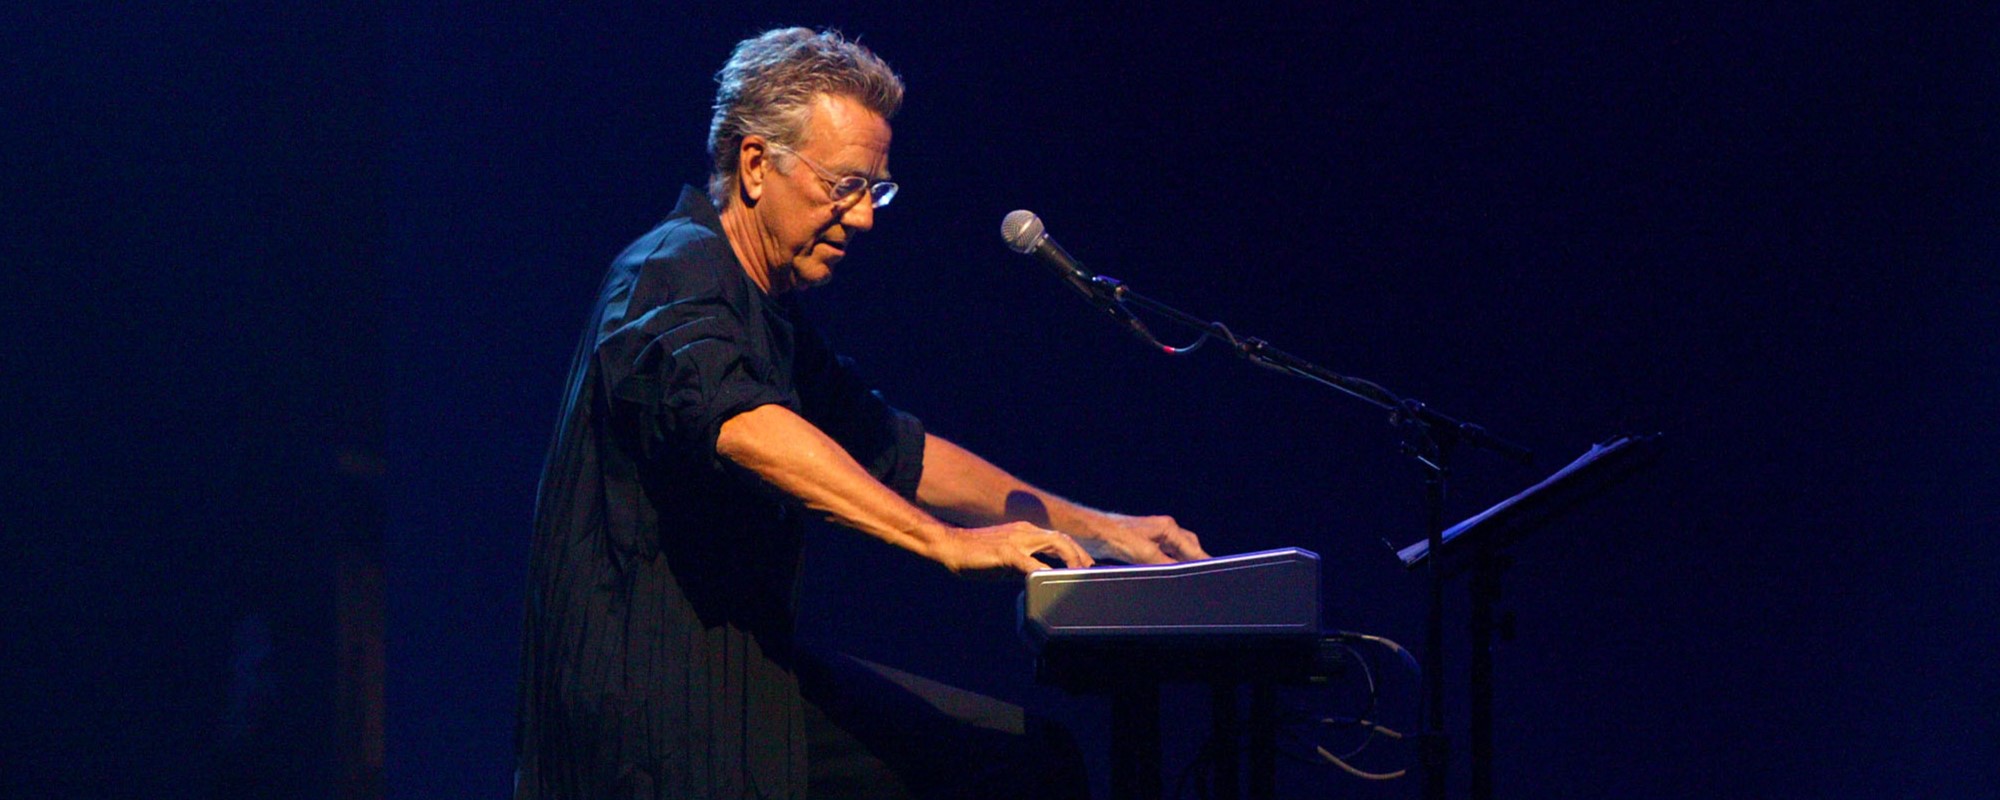 5 Songs by Various Artists Featuring The Doors’ Ray Manzarek—Including Weird Al and Skrillex